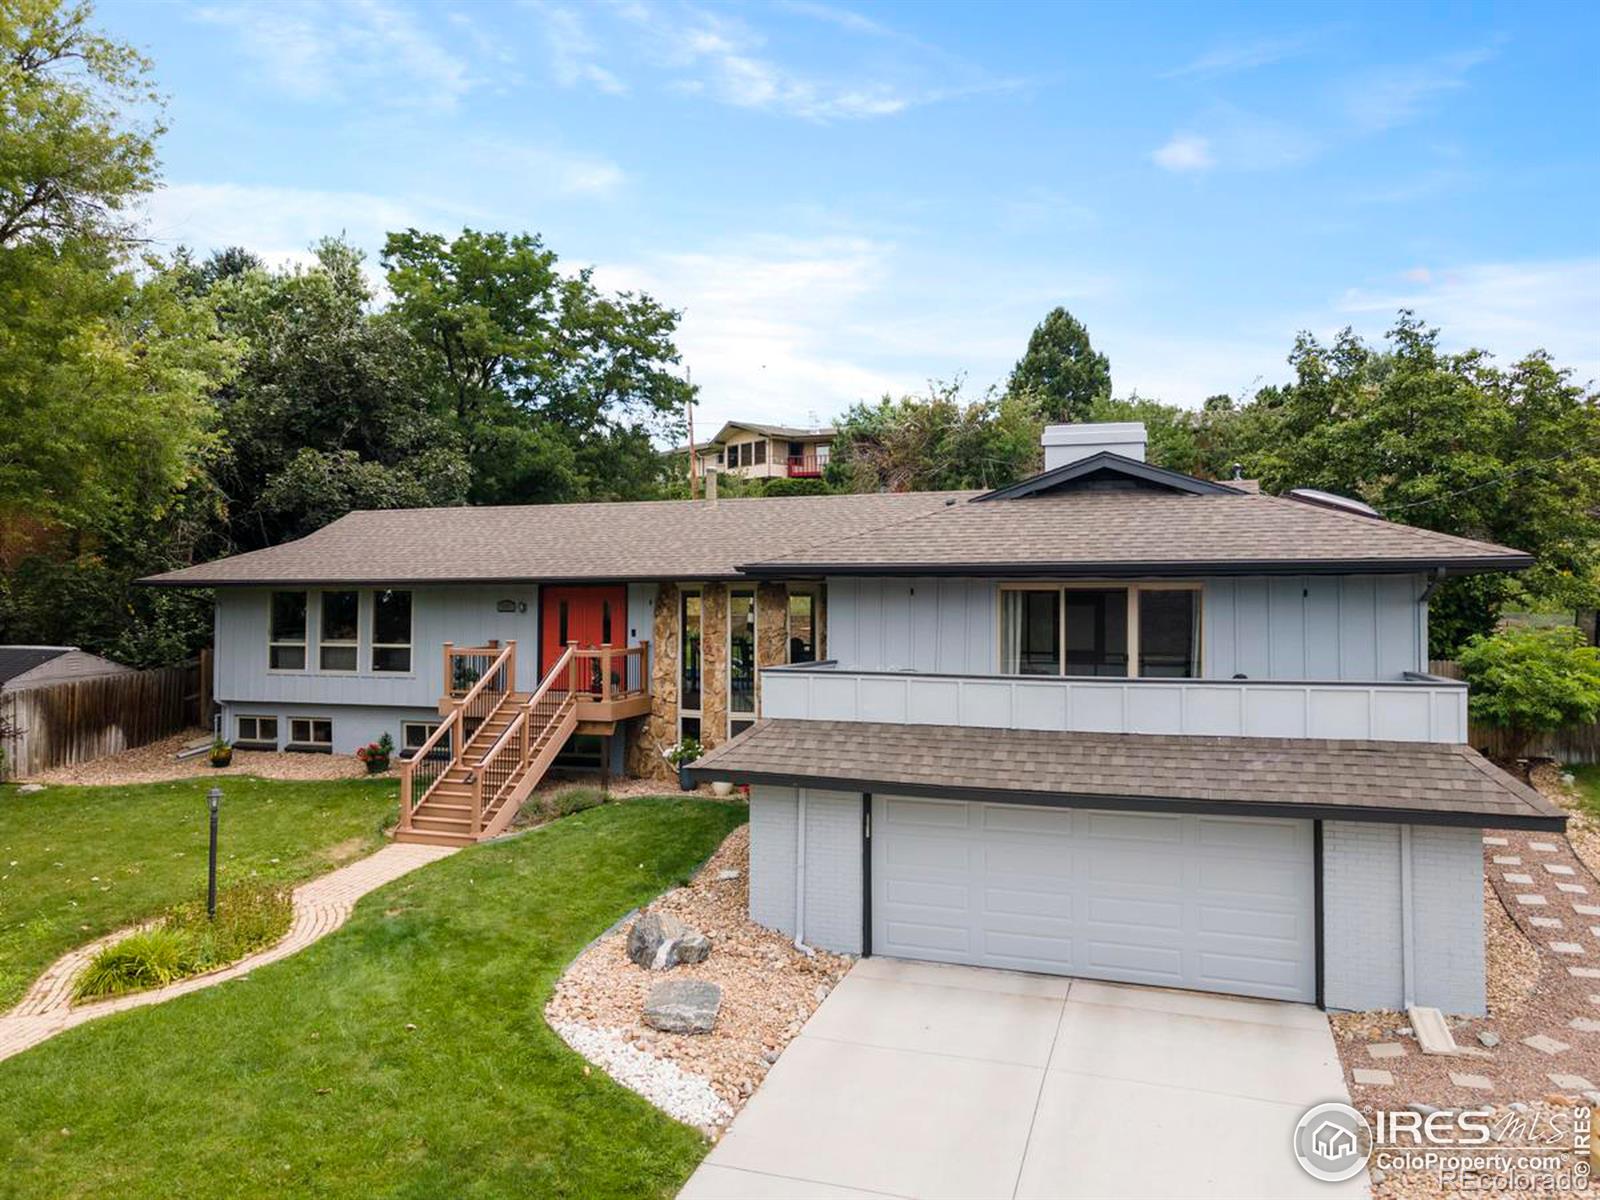 6976  dudley drive, Arvada sold home. Closed on 2023-09-08 for $935,000.